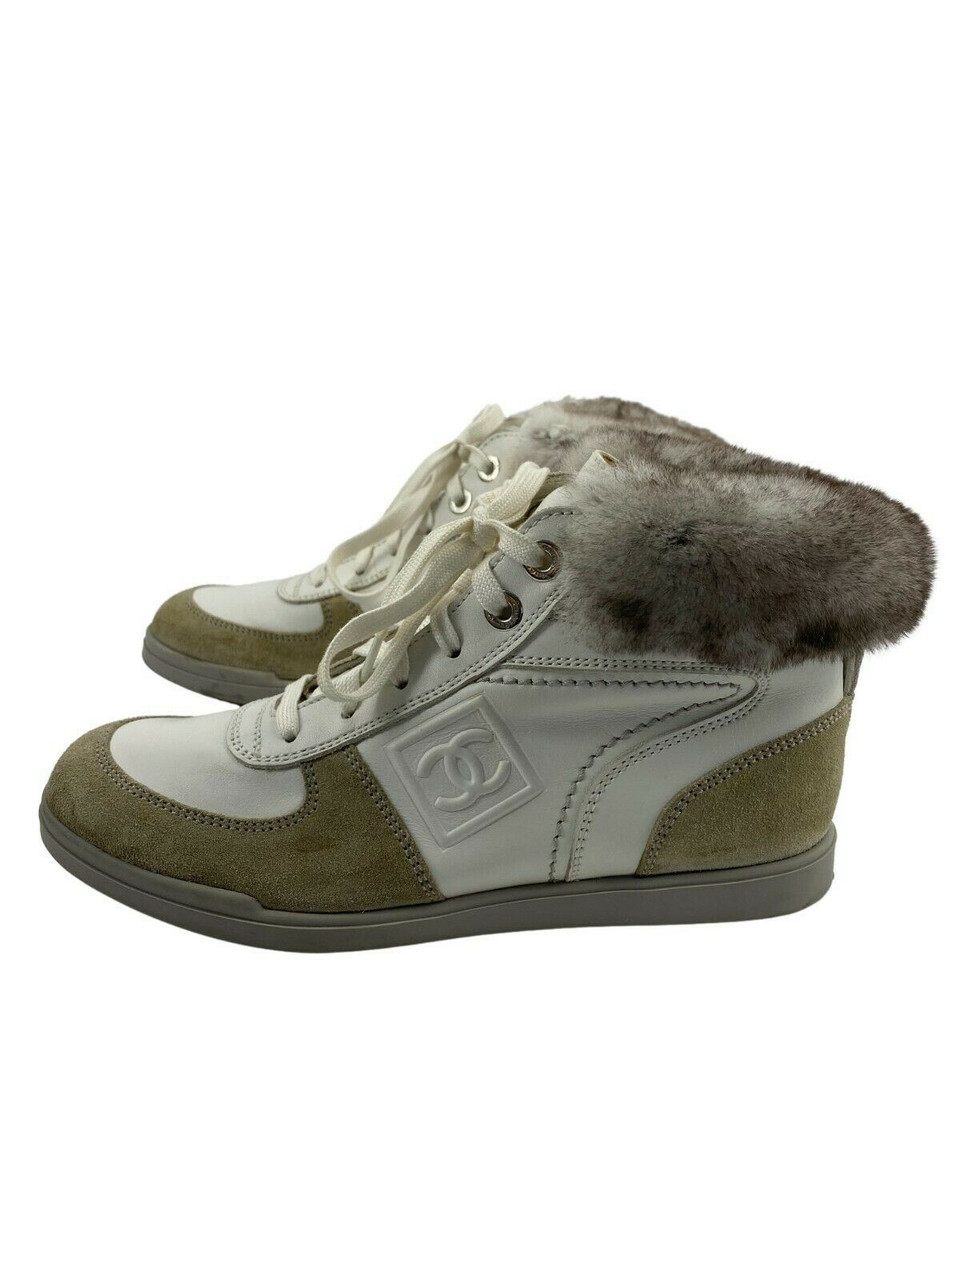 Chanel Leather High Top Sneakers with Chinchilla Fur Trim - Free